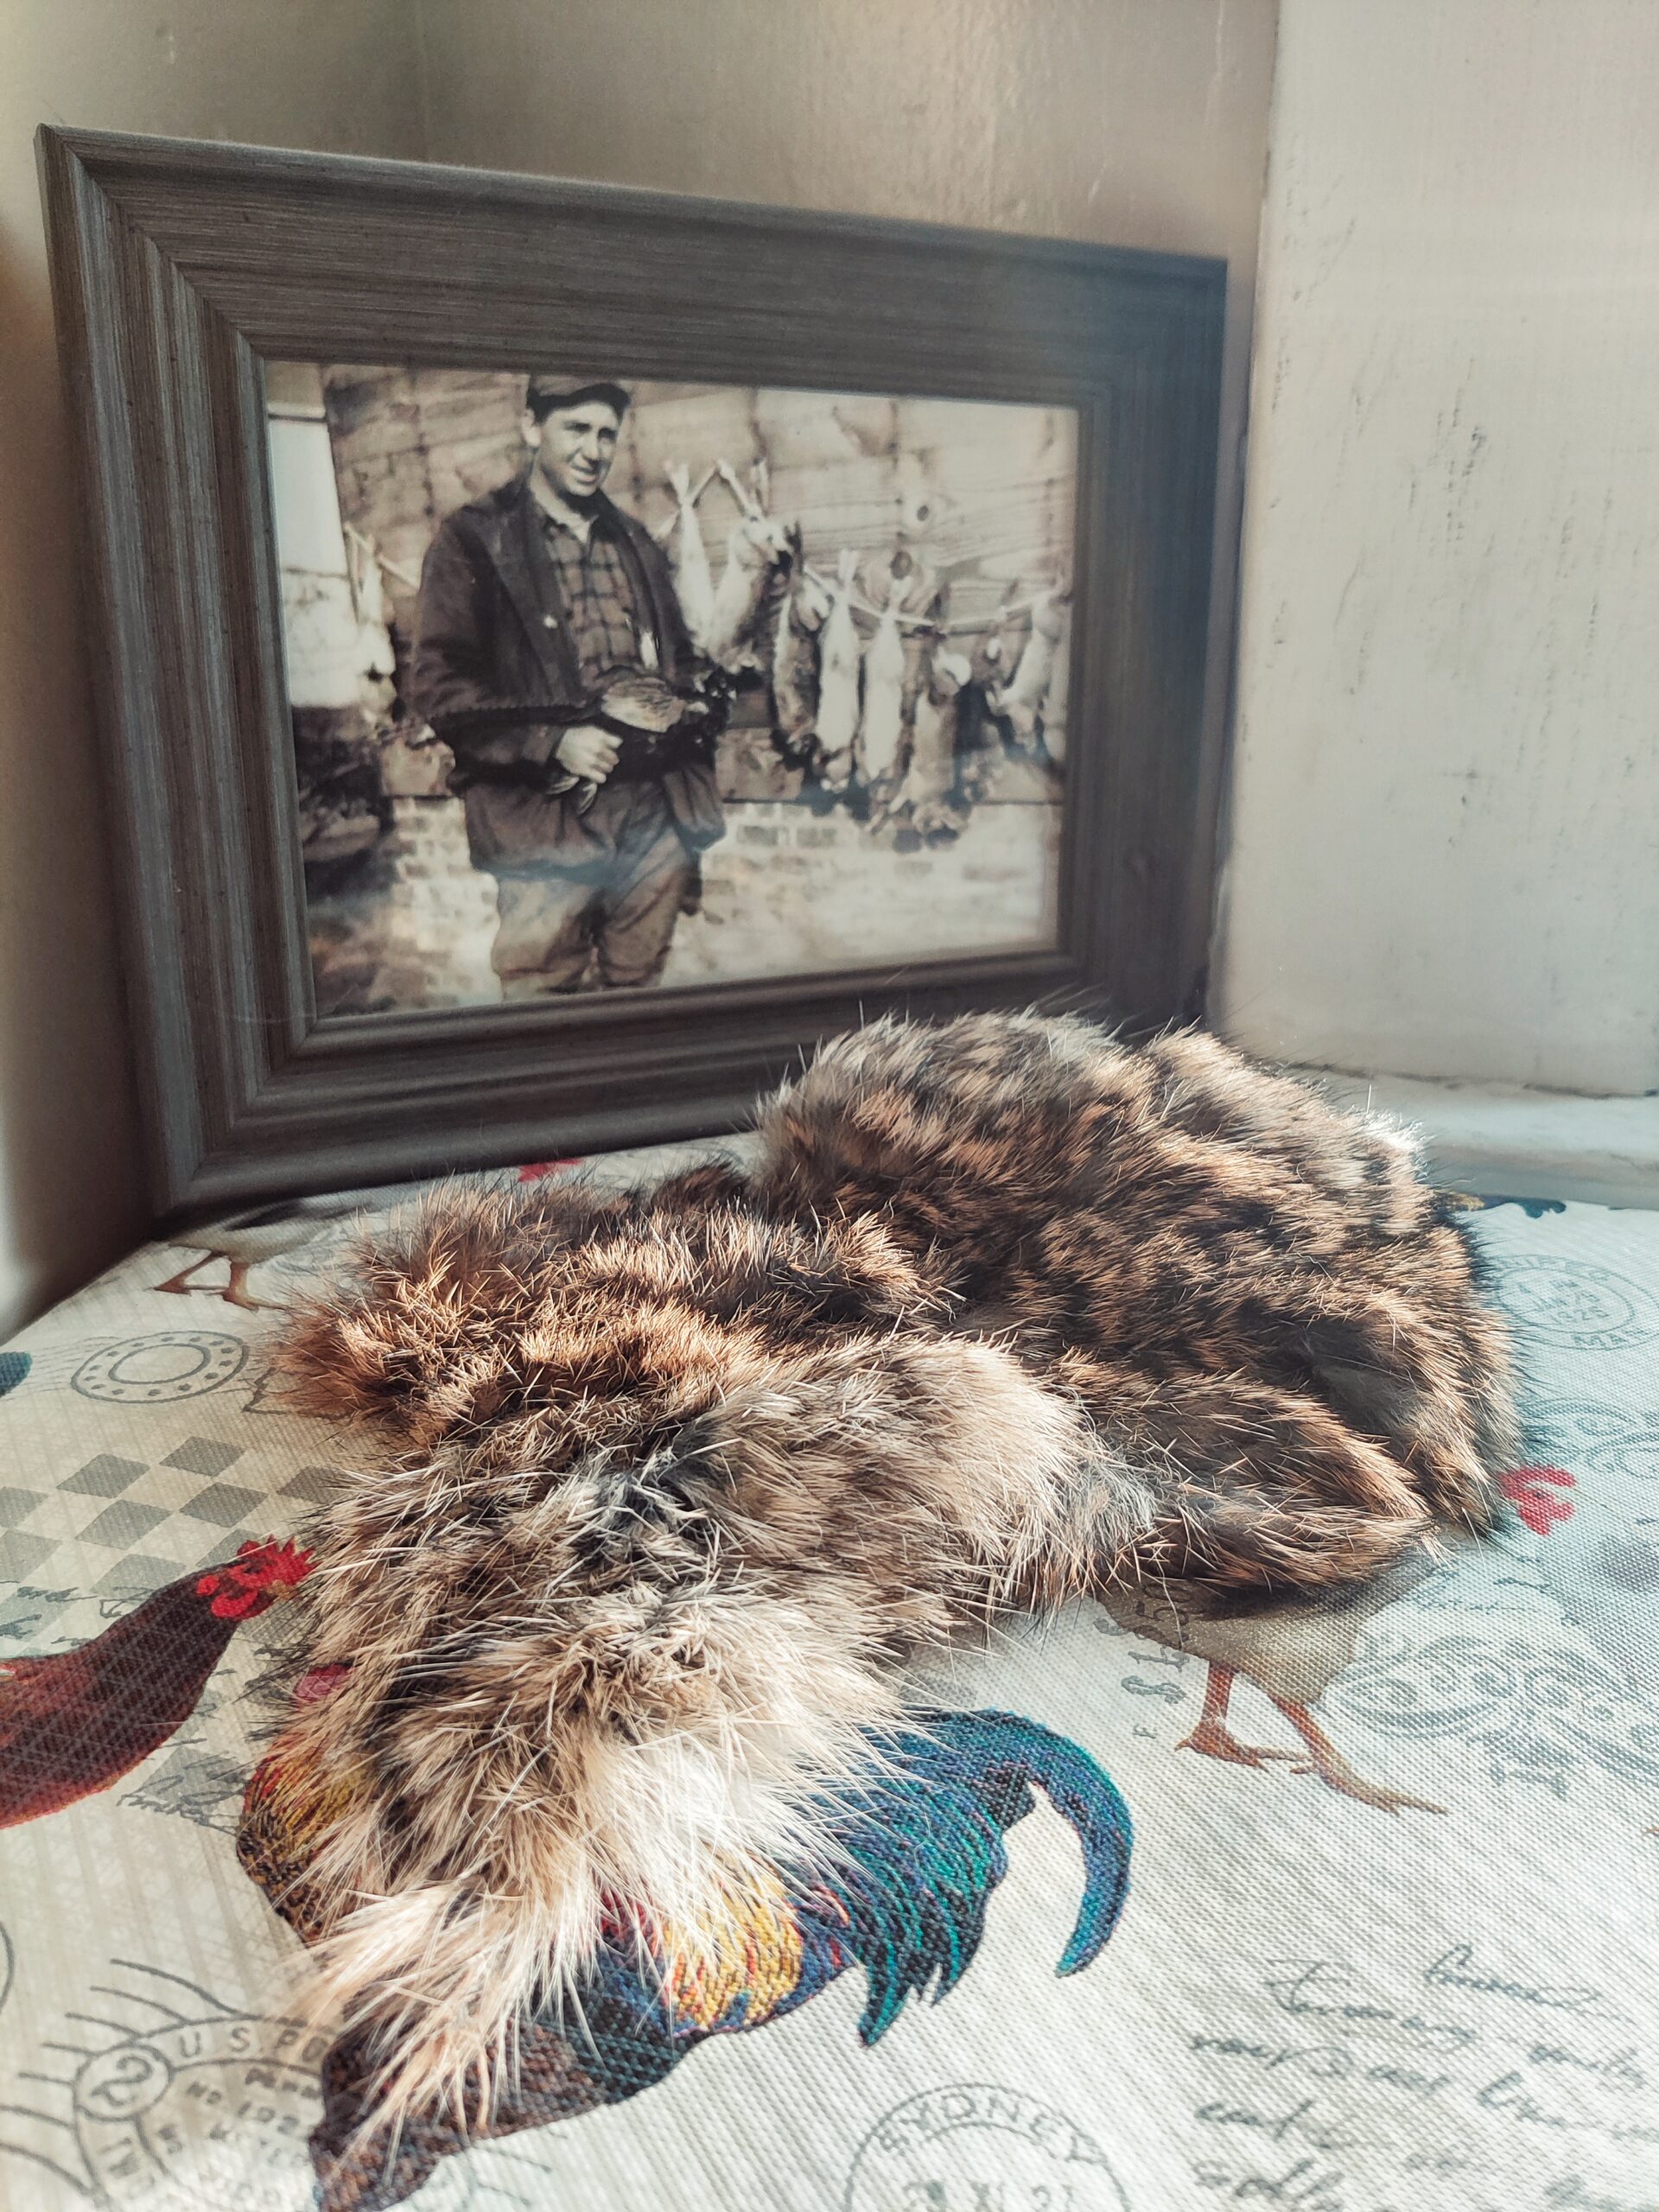 A rabbit hide on a table, in front of an old black and white photograph.